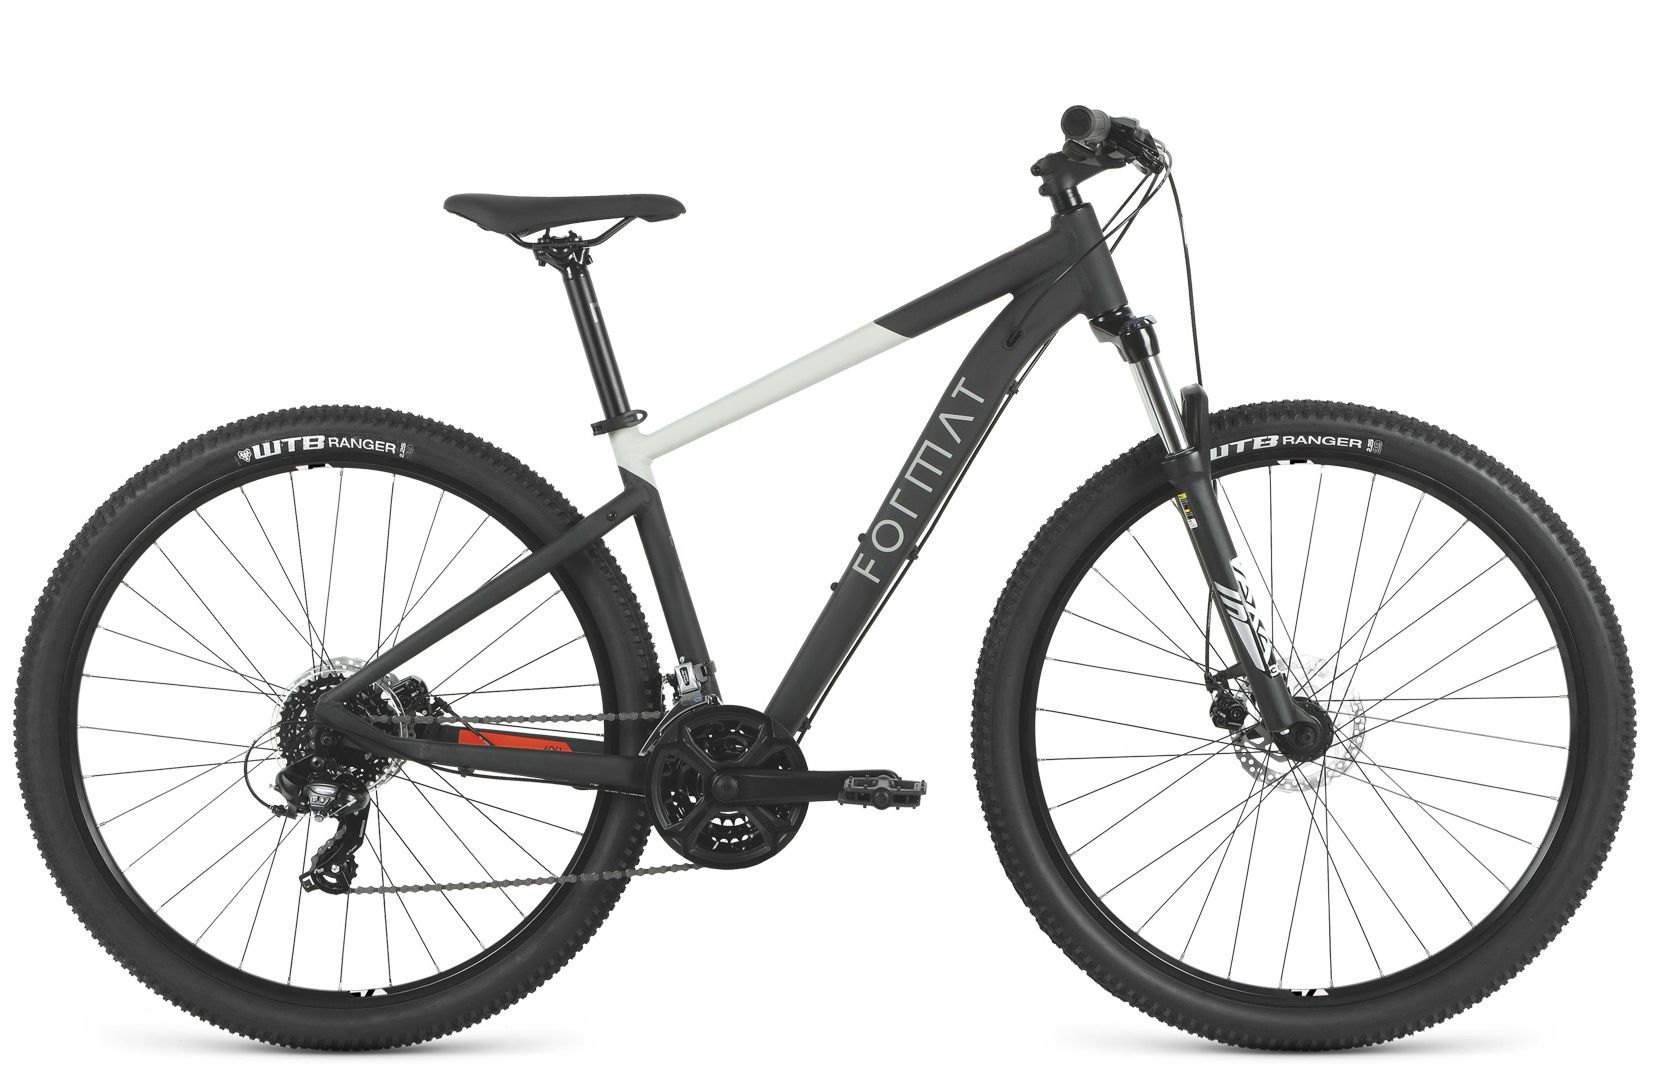 Электровелосипед specialized Turbo levo. Format 1415 27.5. Altair MTB HT 26 2.0 D. Велосипед format 1415 27.5 (2021). Купить велосипед 29 21